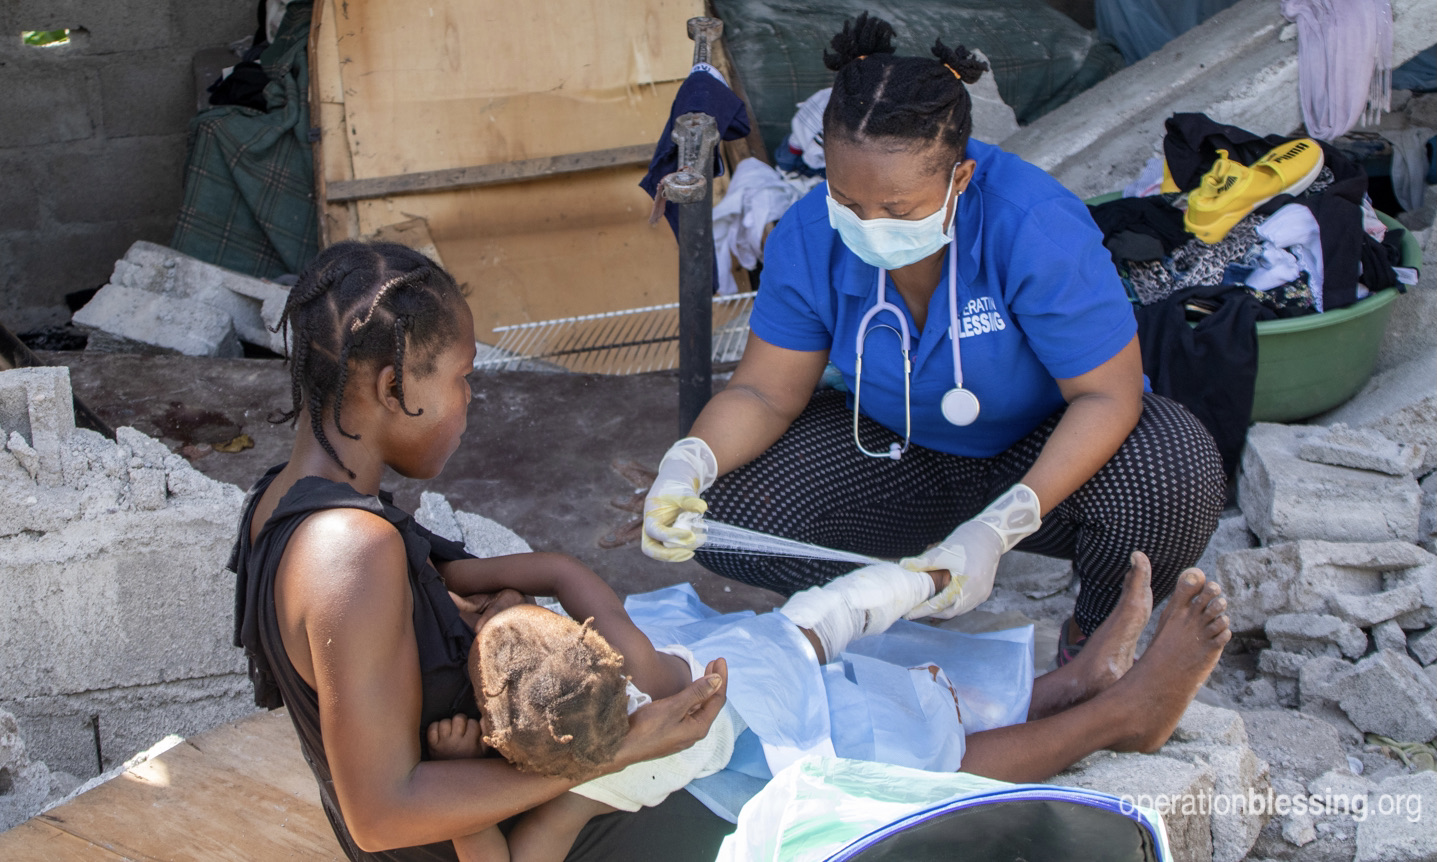 Operation Blessing's team assists earthquake victims in Haiti.